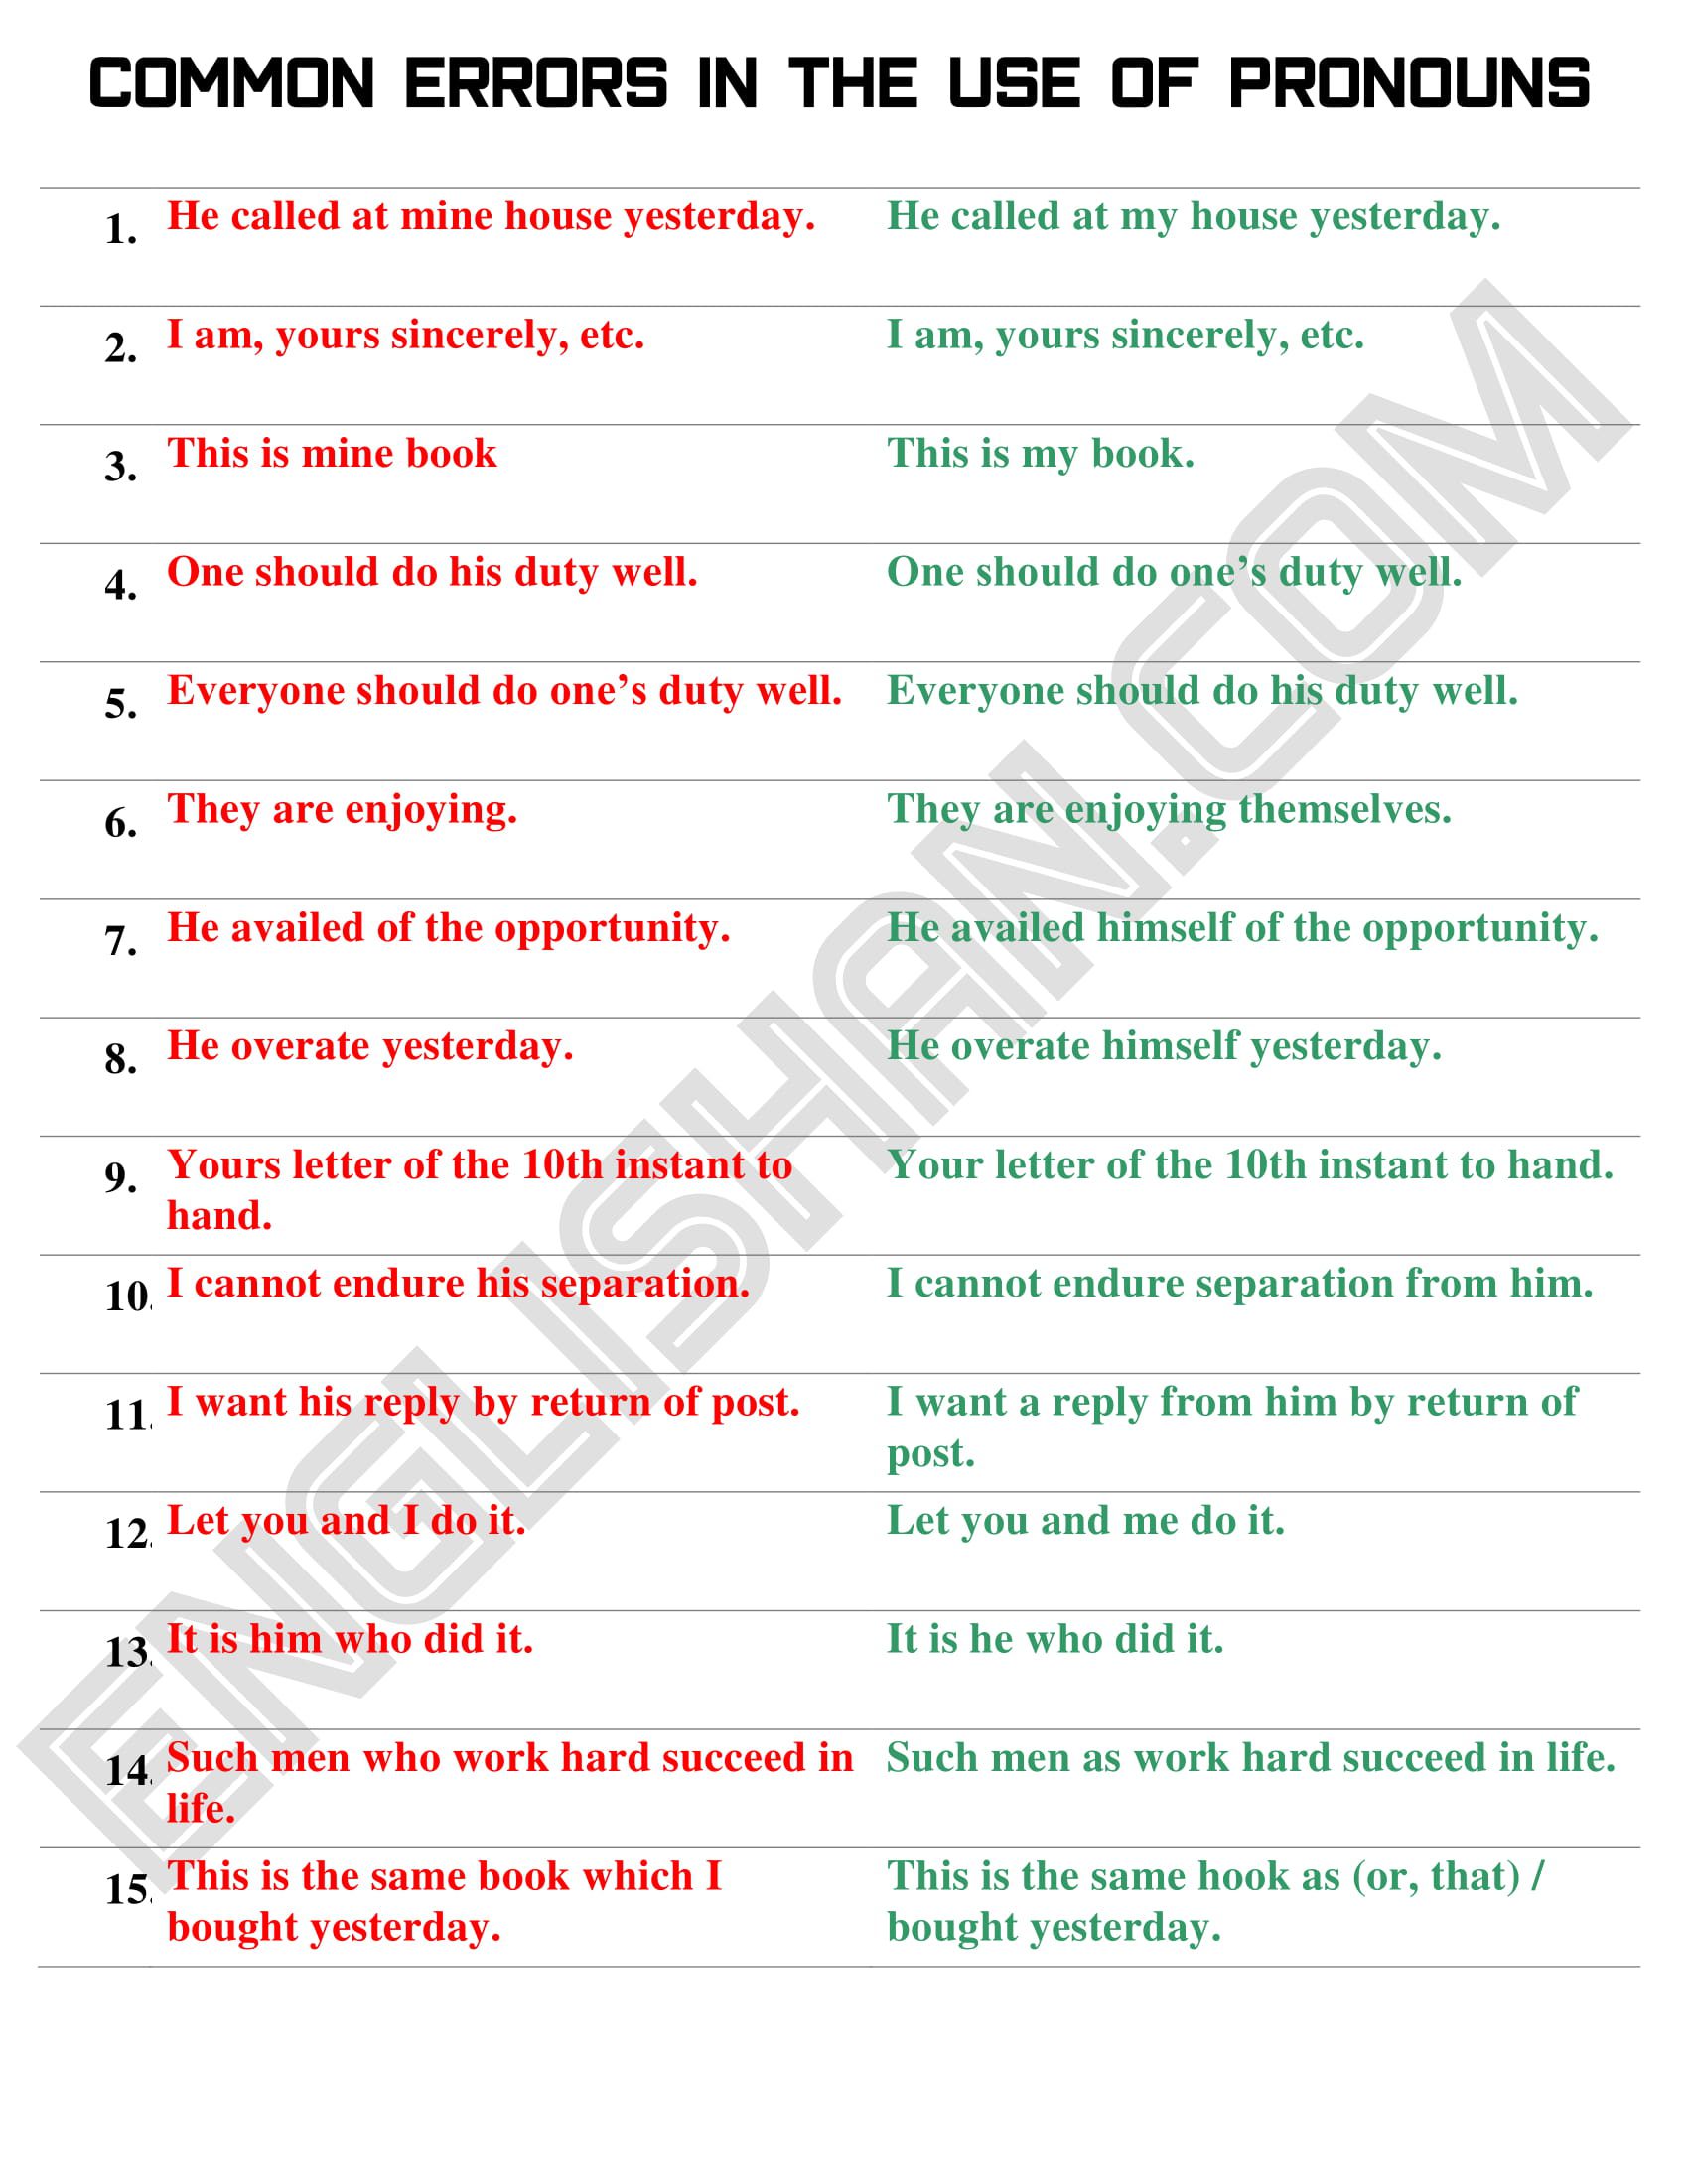 Common Pronoun Errors With Uses And Examples In PDF